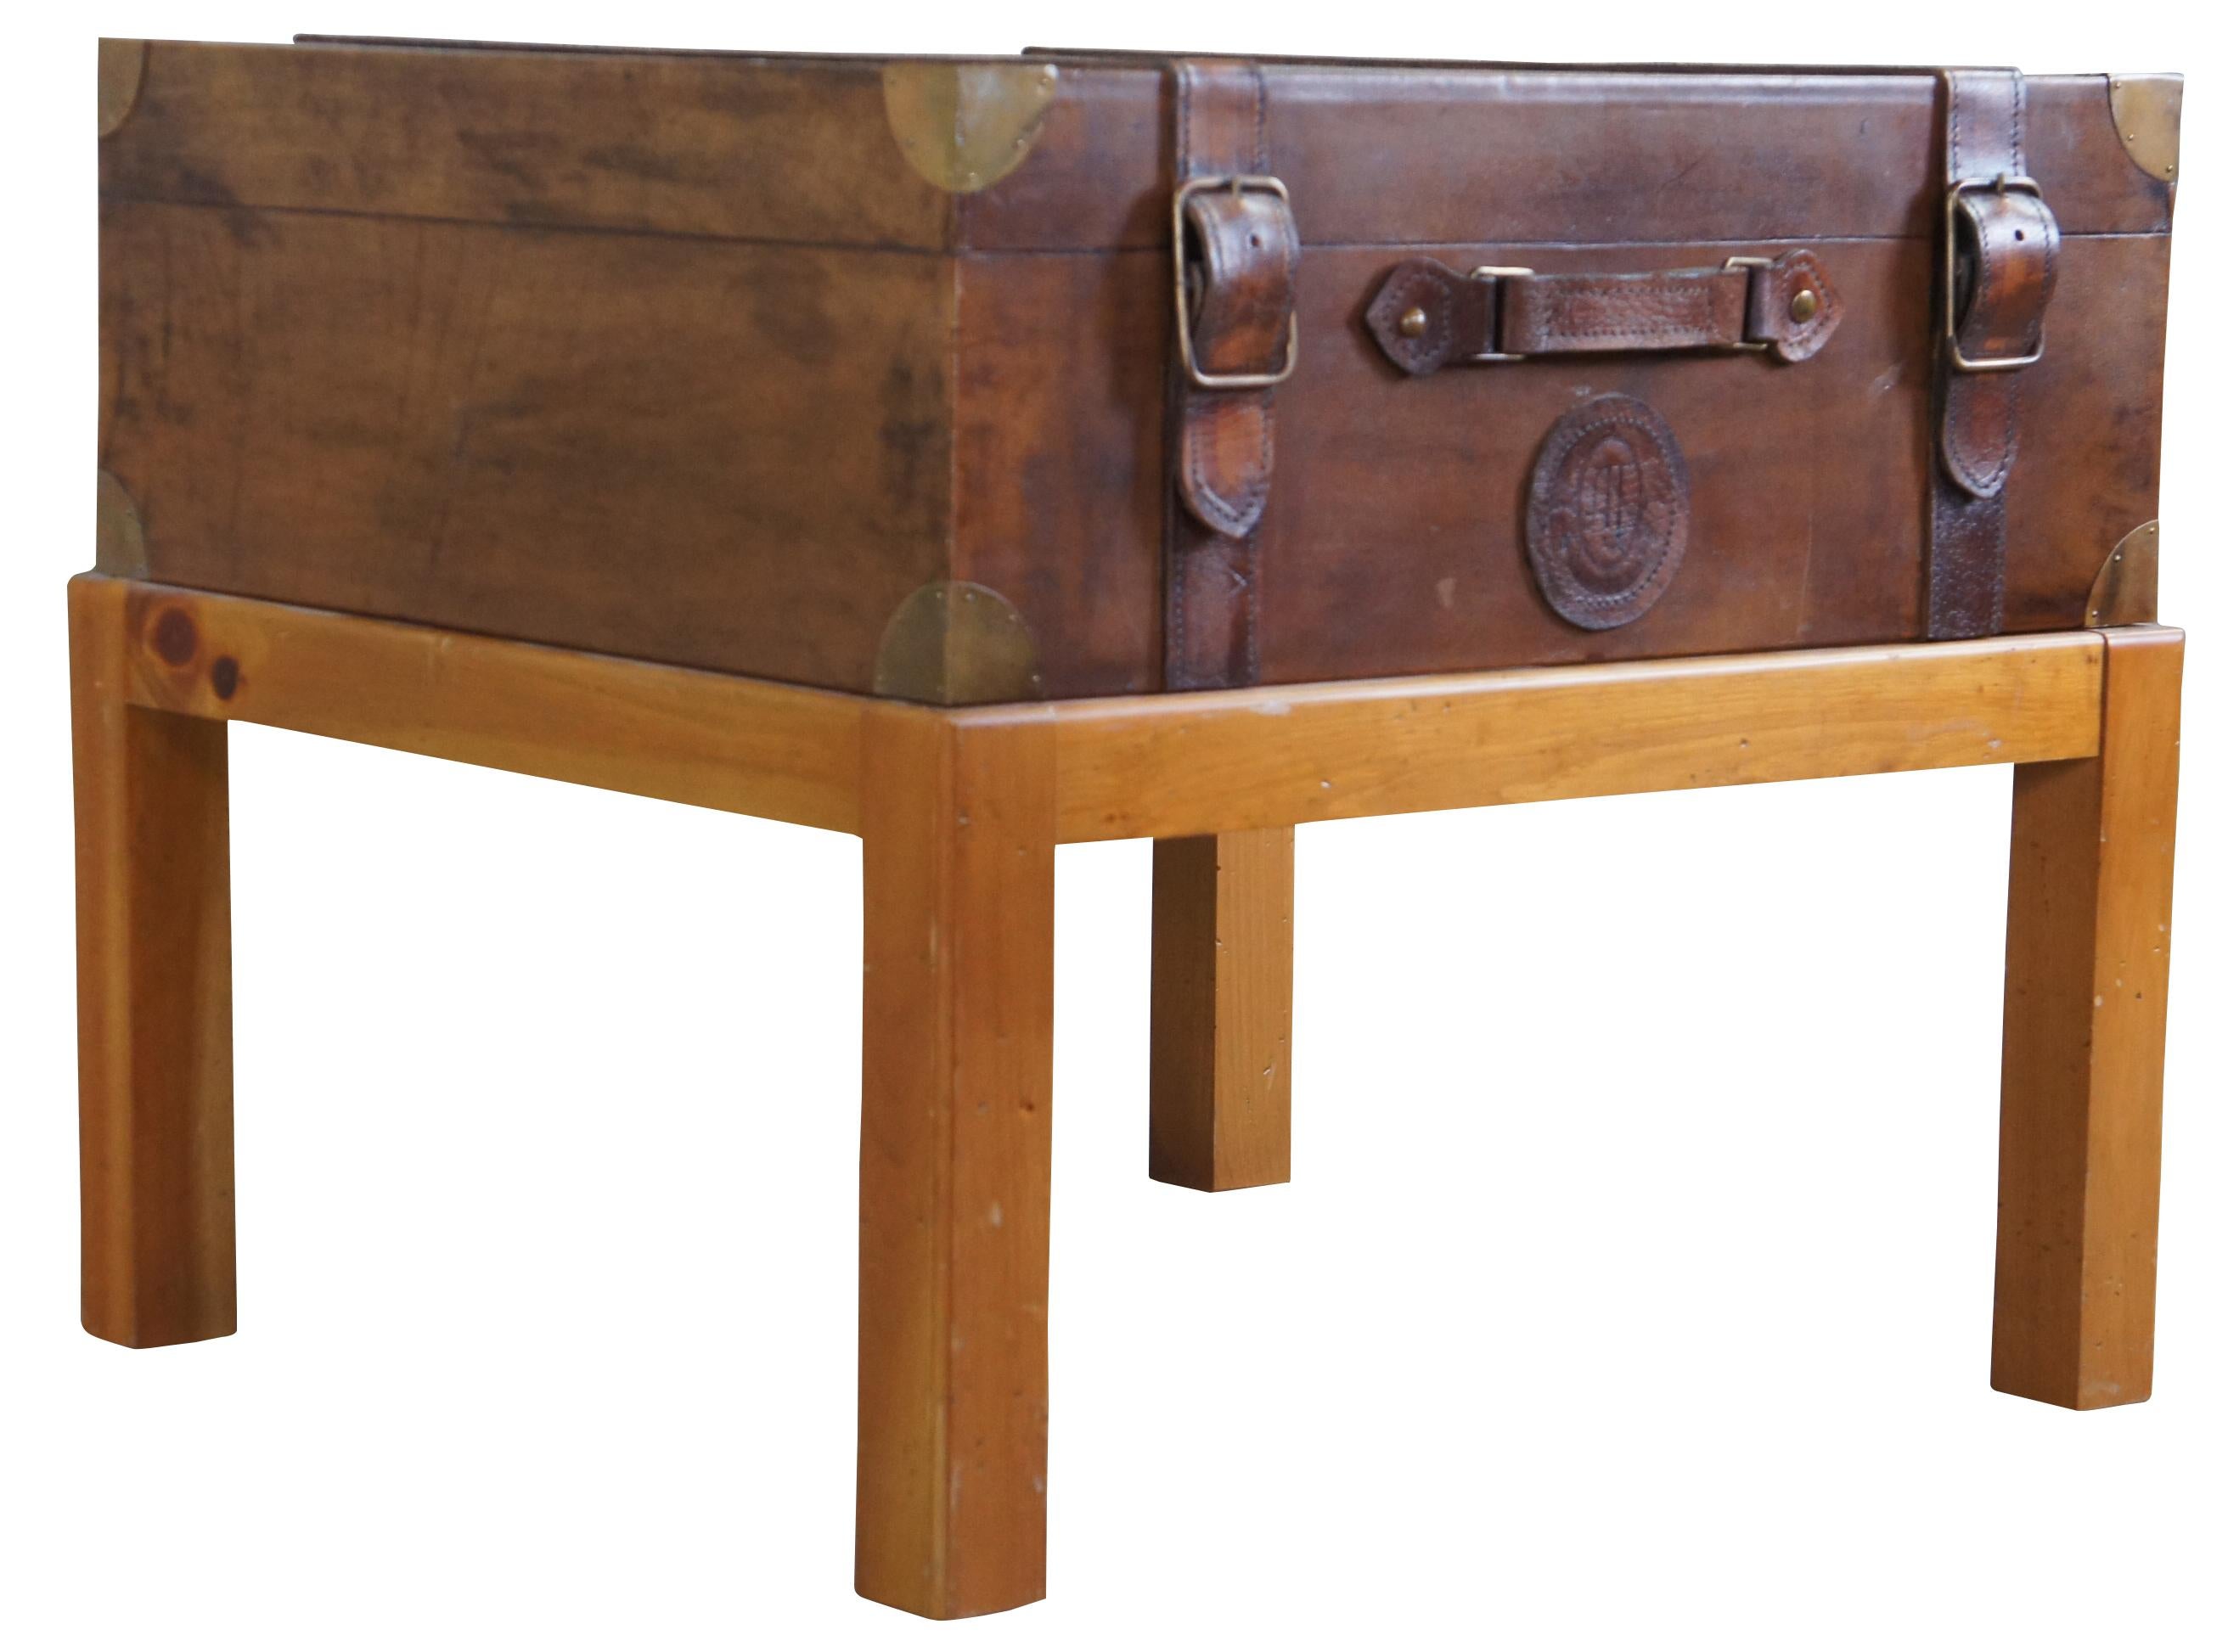 Vintage 1994 leather steam trunk on Pine stand. Features straps and brass covered corners. Trunk does not open. Measure: 25